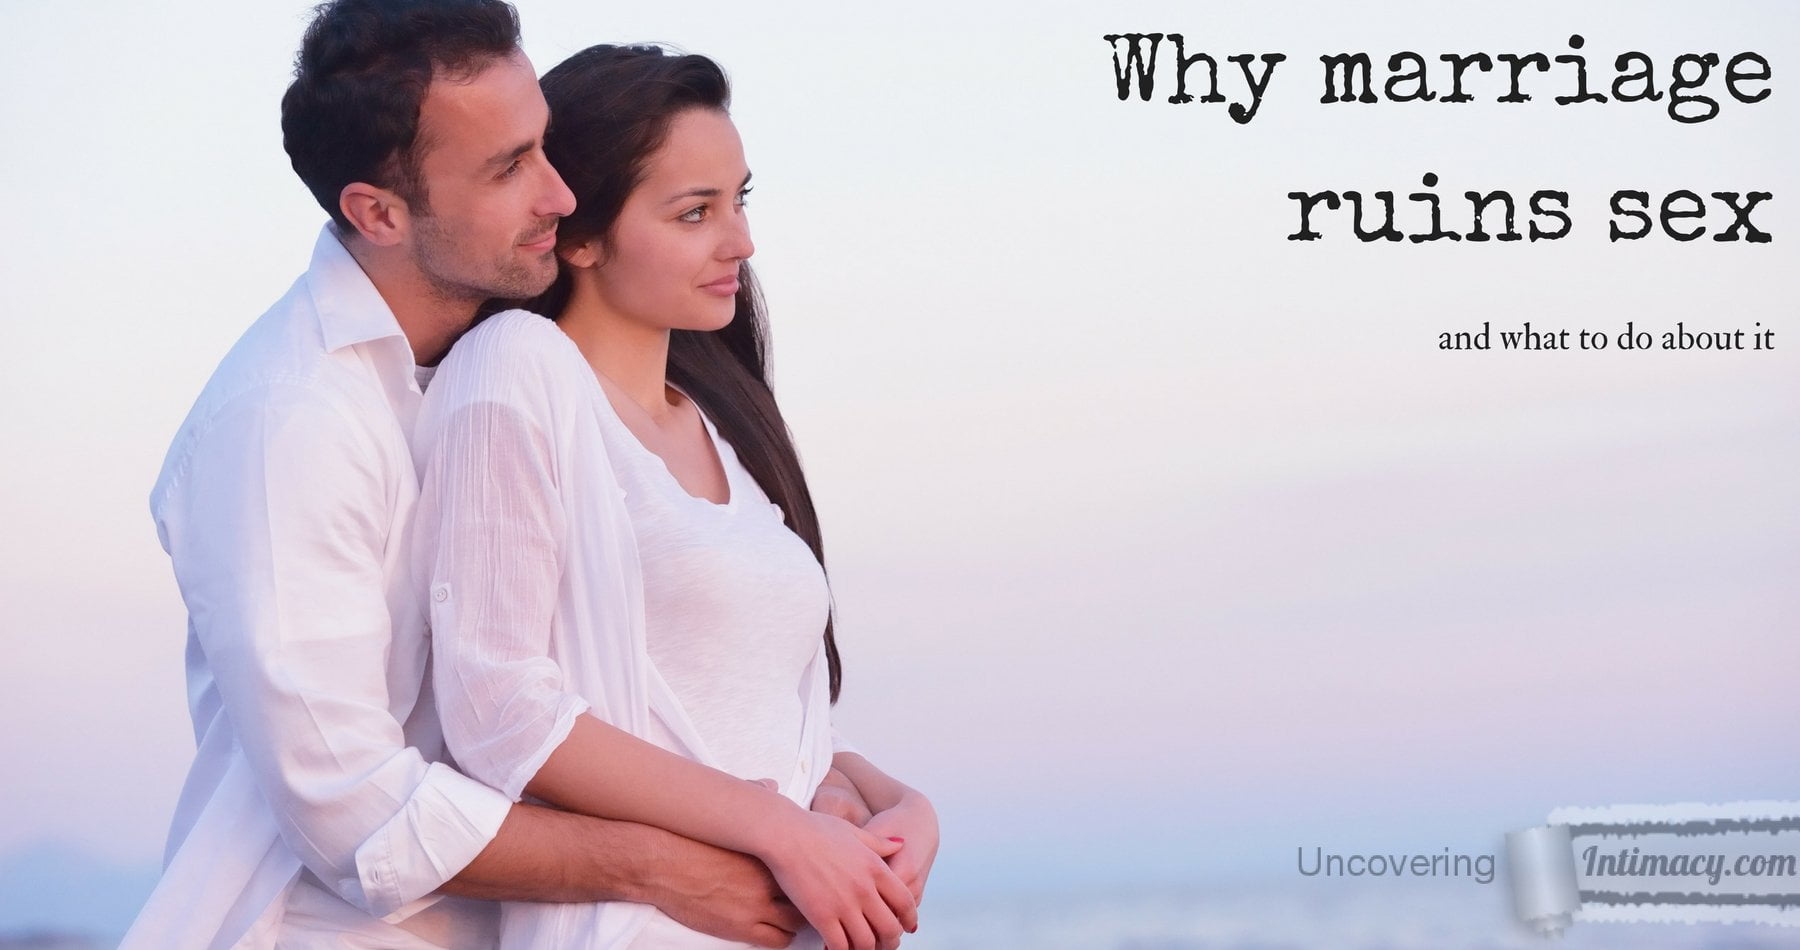 Why marriage ruins